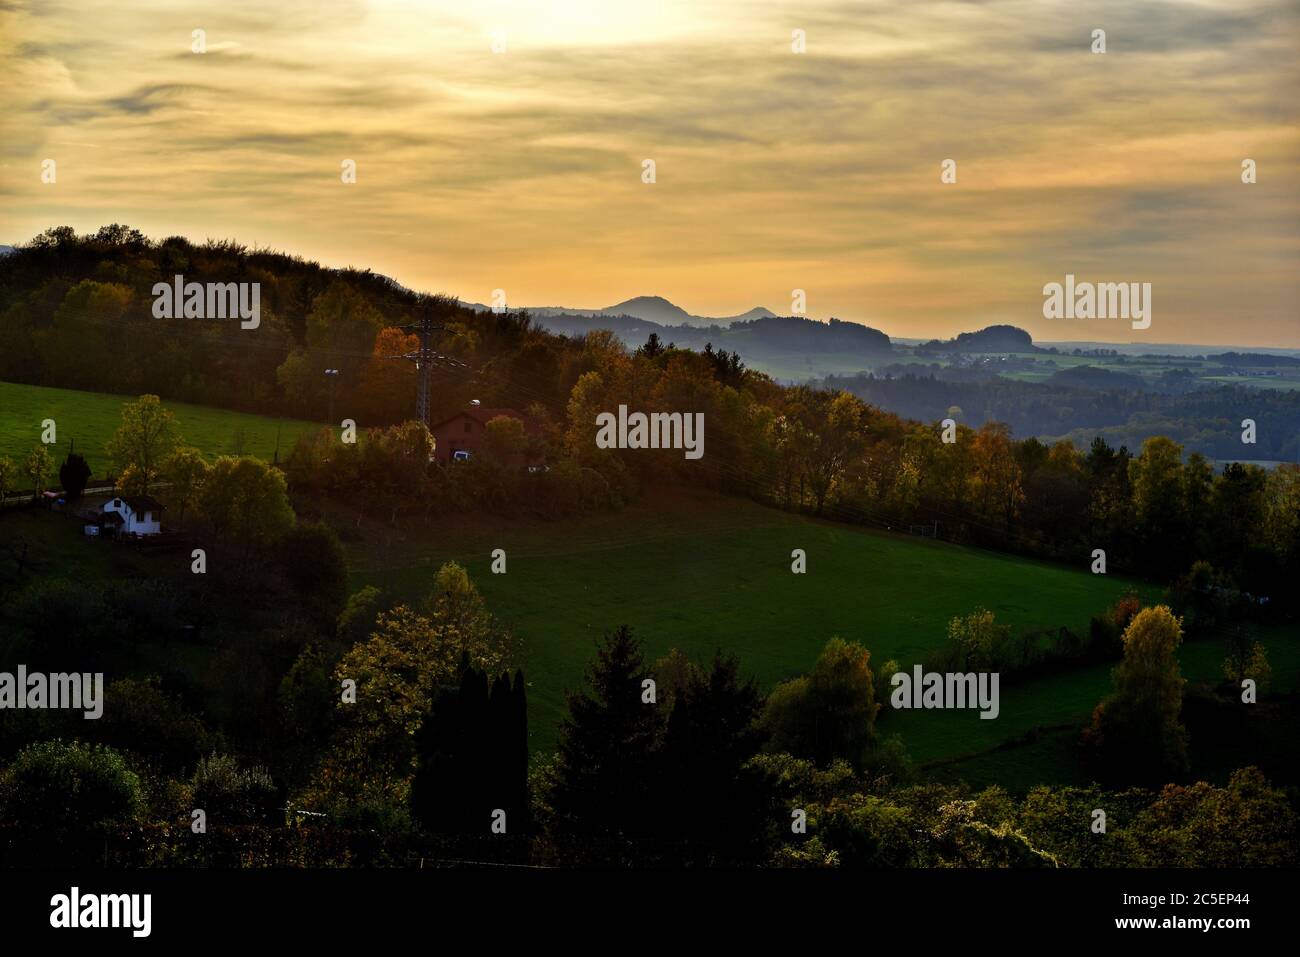 Looking down at a Swabian Alb Landscape with Colorful Autumn Trees, at The Horizon you can see Hill Hohenstaufen and Hill Rechberg, Germany, Europe Stock Photo